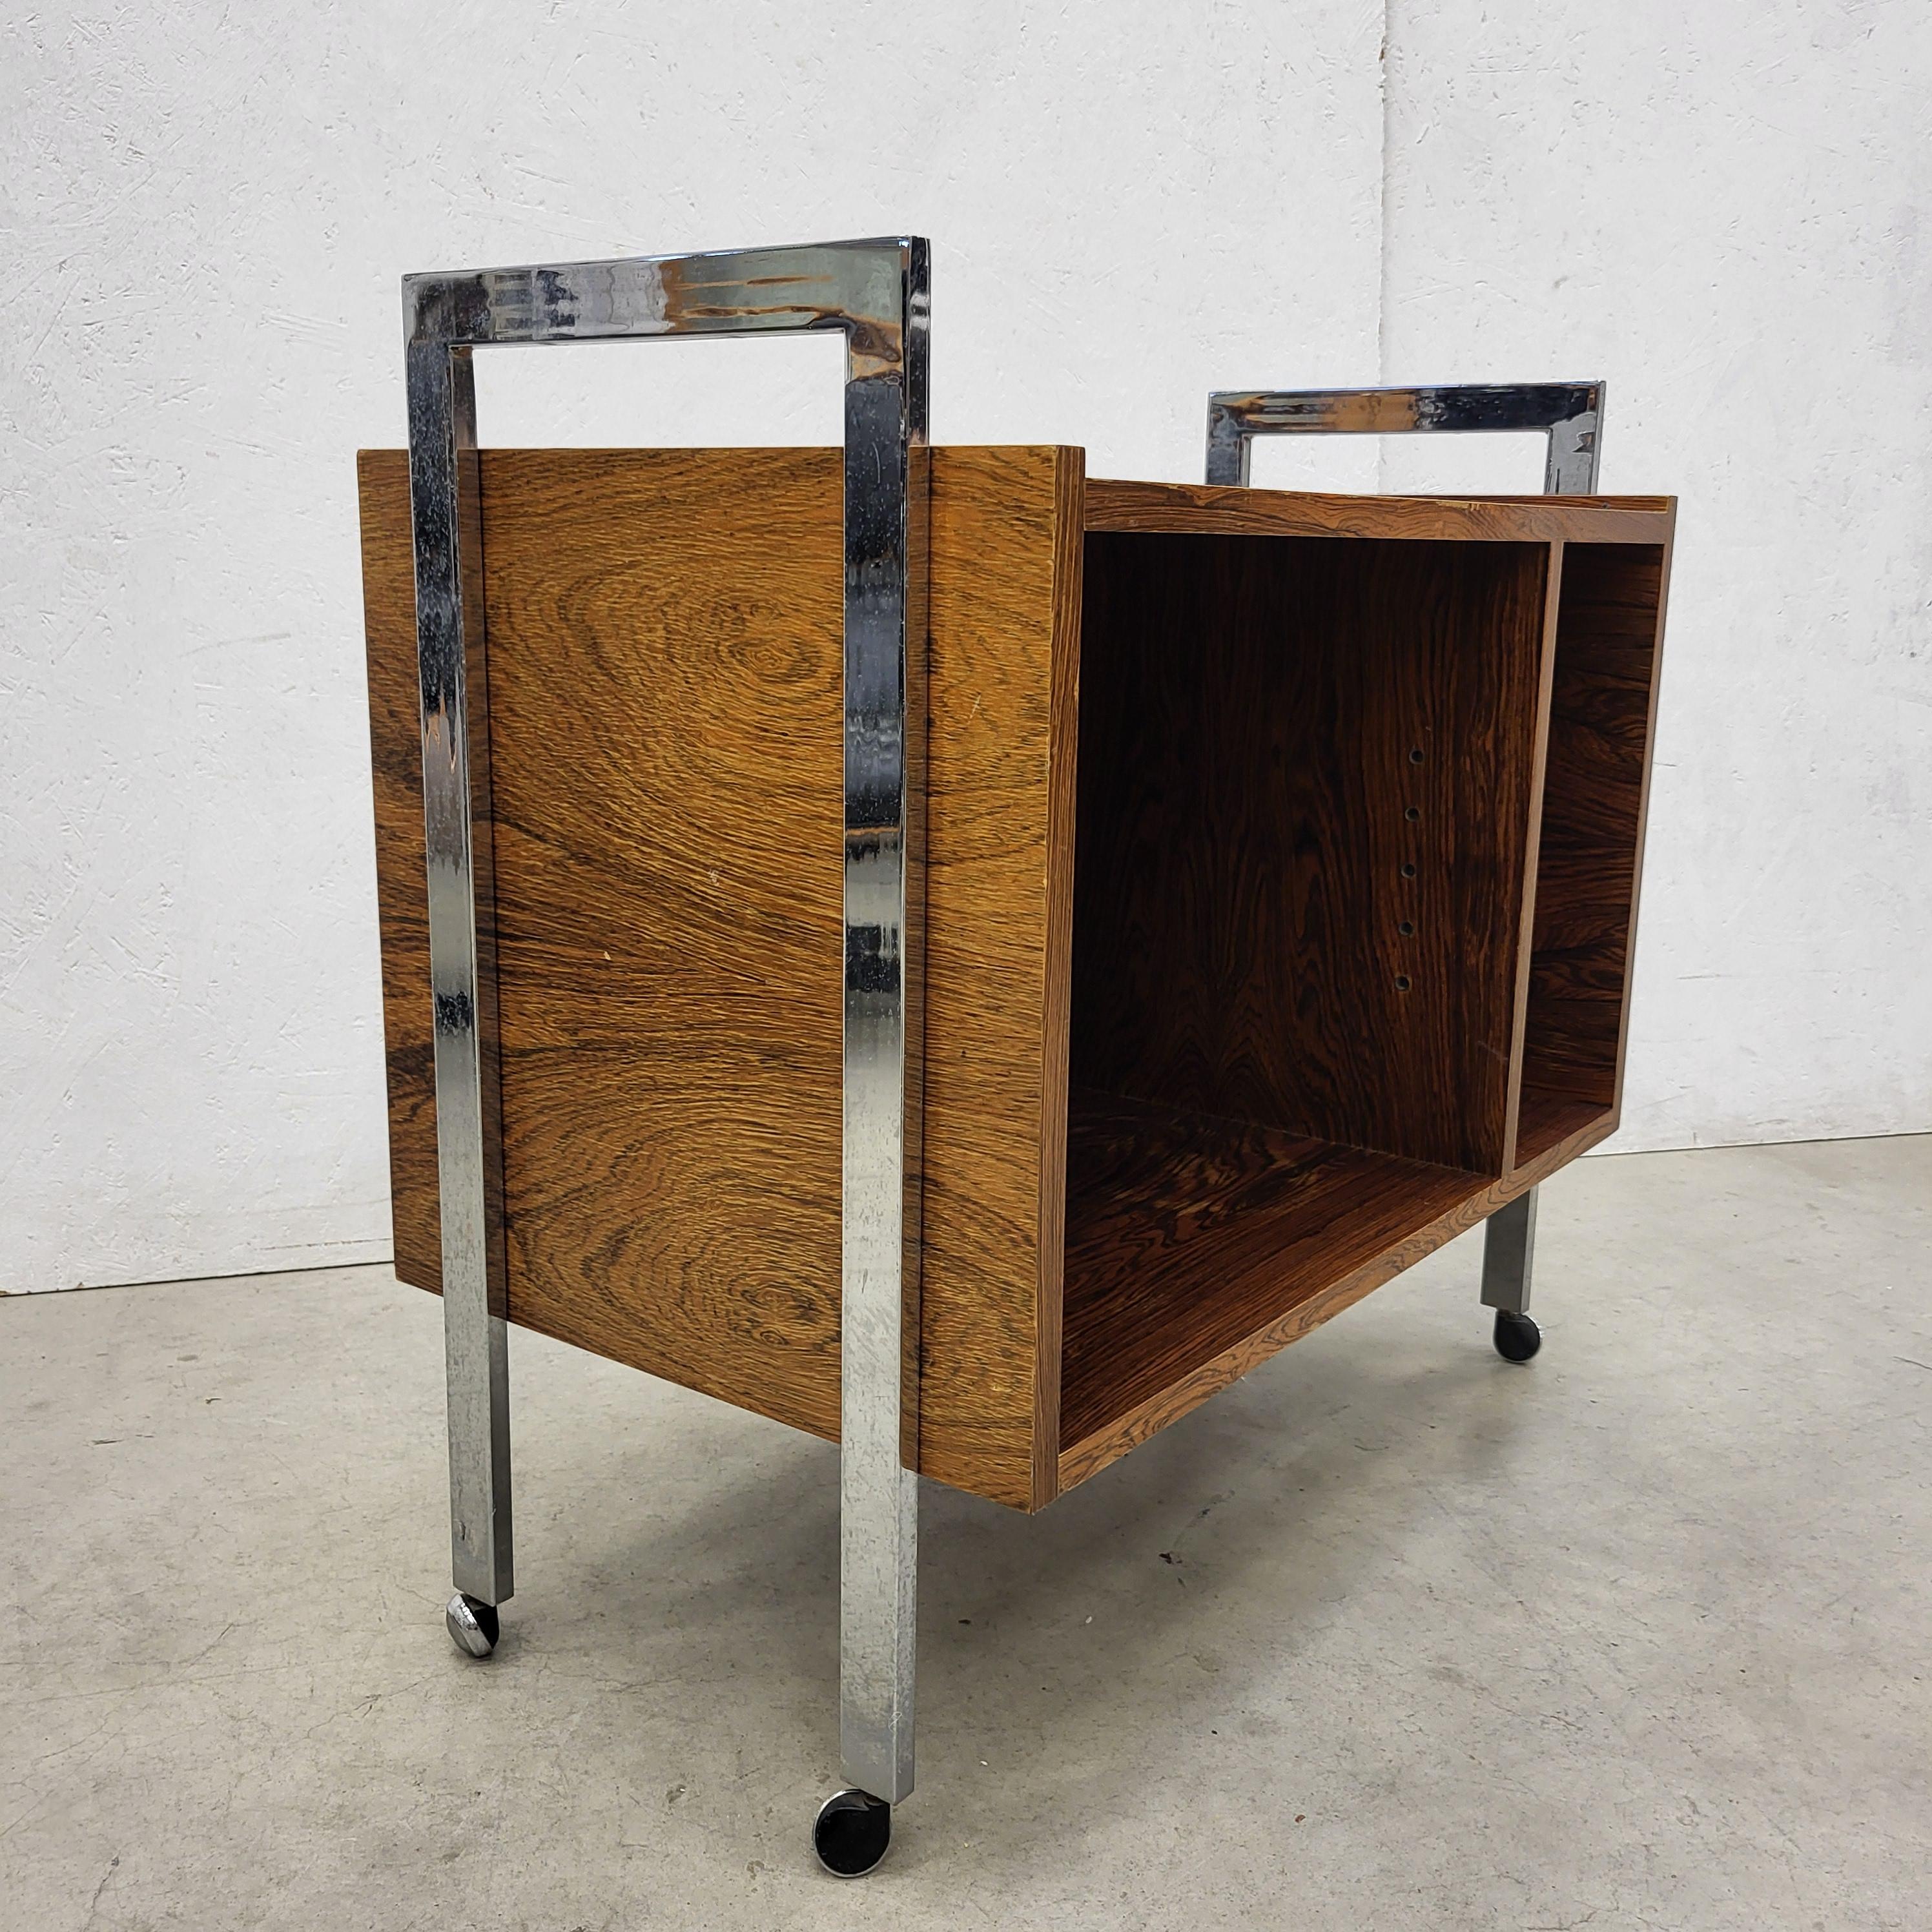 Rare Bodil Kjaer Cabinet Trolley by E. Pederson & Son Denmark 1959 In Good Condition For Sale In Aachen, NW